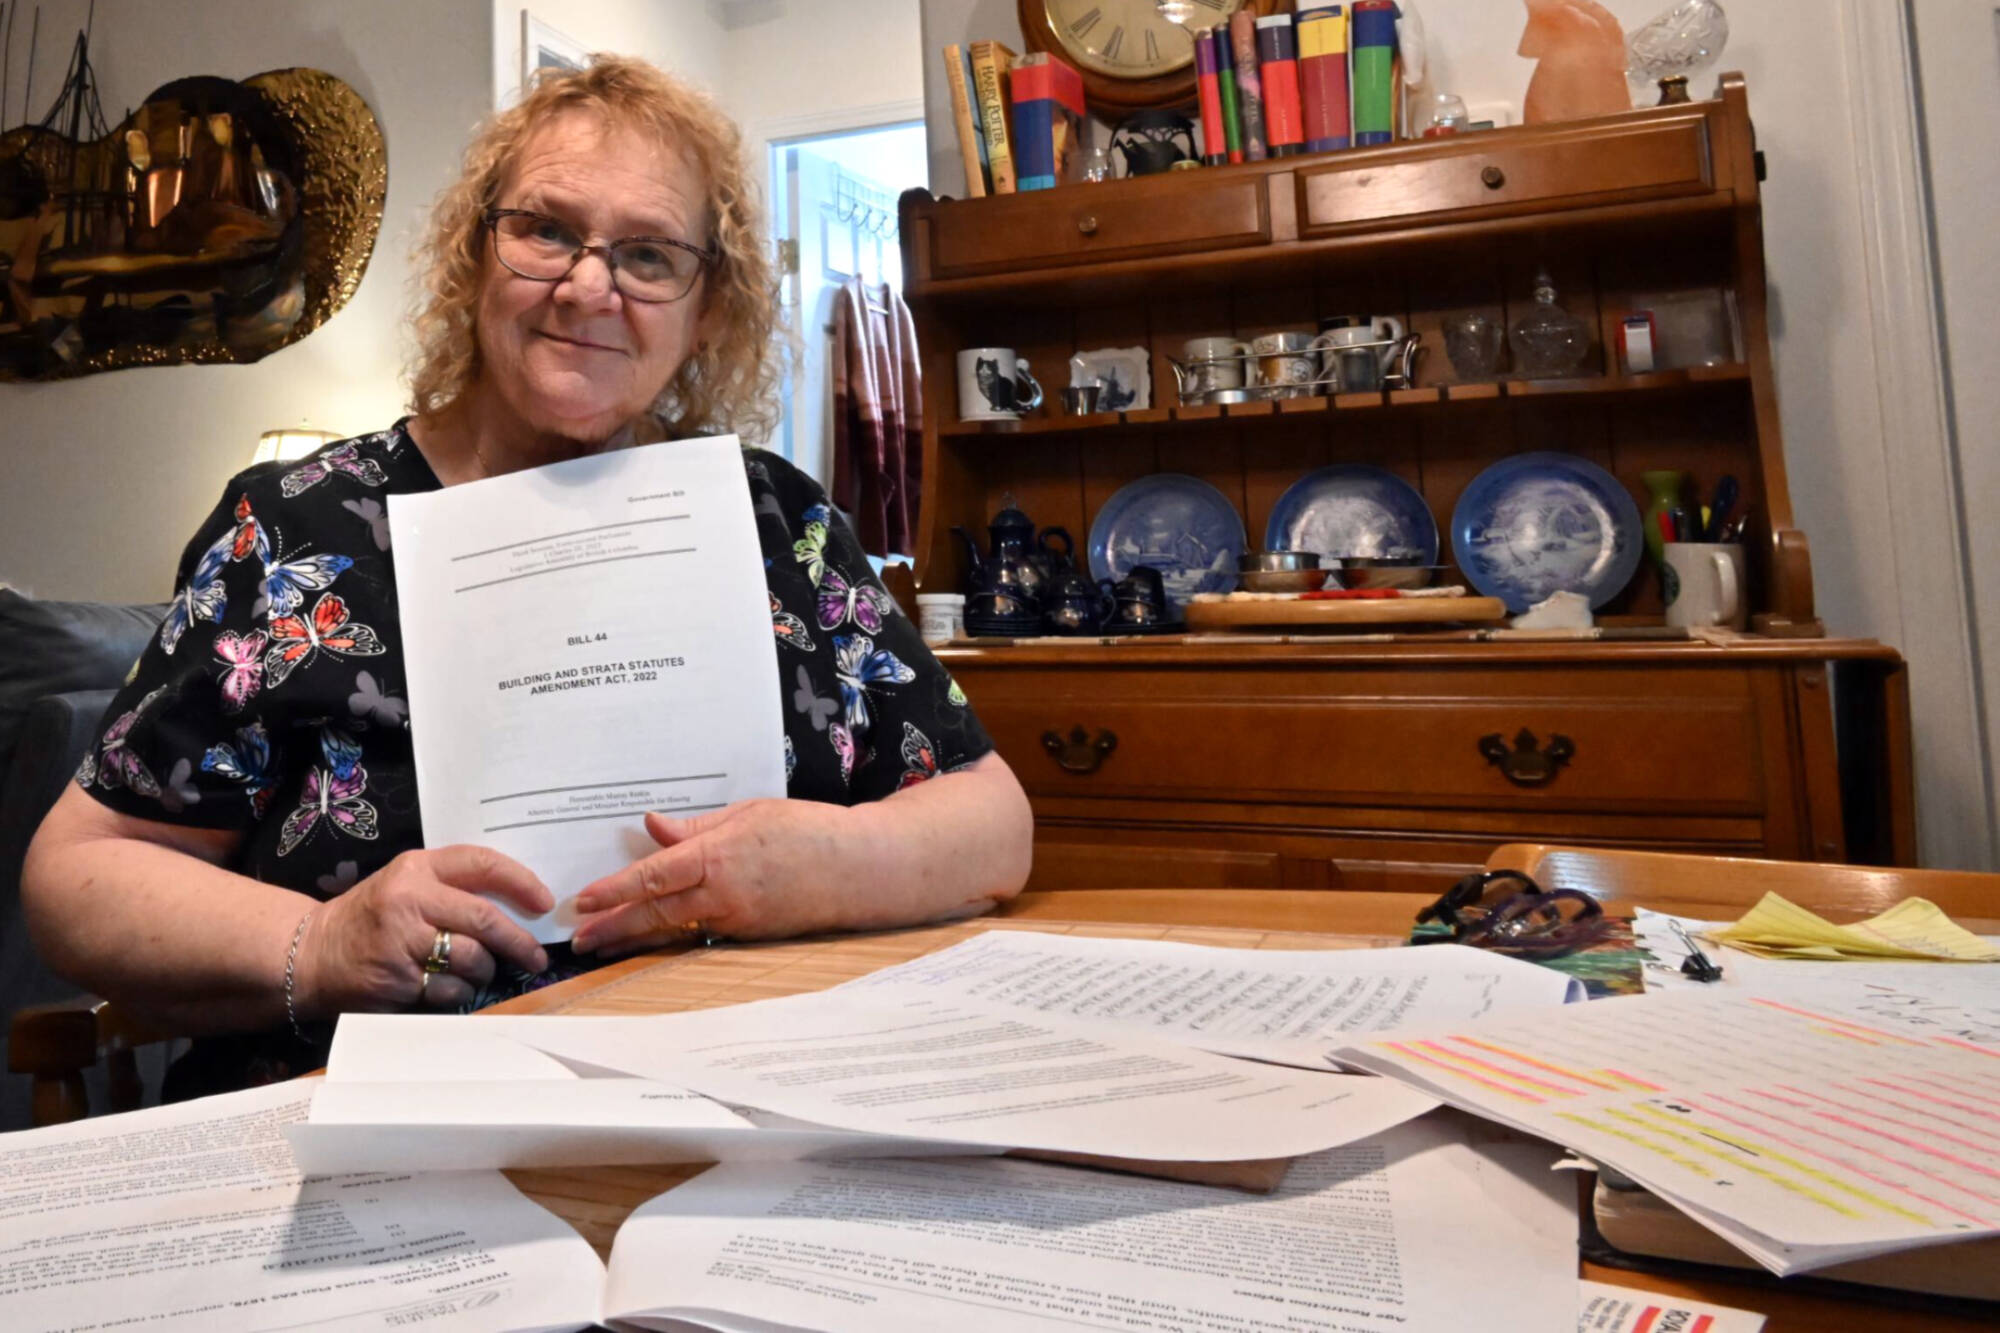 Toni Russell holds up a copy of Bill 44, which removed the ability for stratas to ban rentals or use 19+ age restrictions. Now the strata at Cherry Lane Towers where she lives is trying to turn the condo complex into a 55+ community. (Brennan Phillips - Western News)